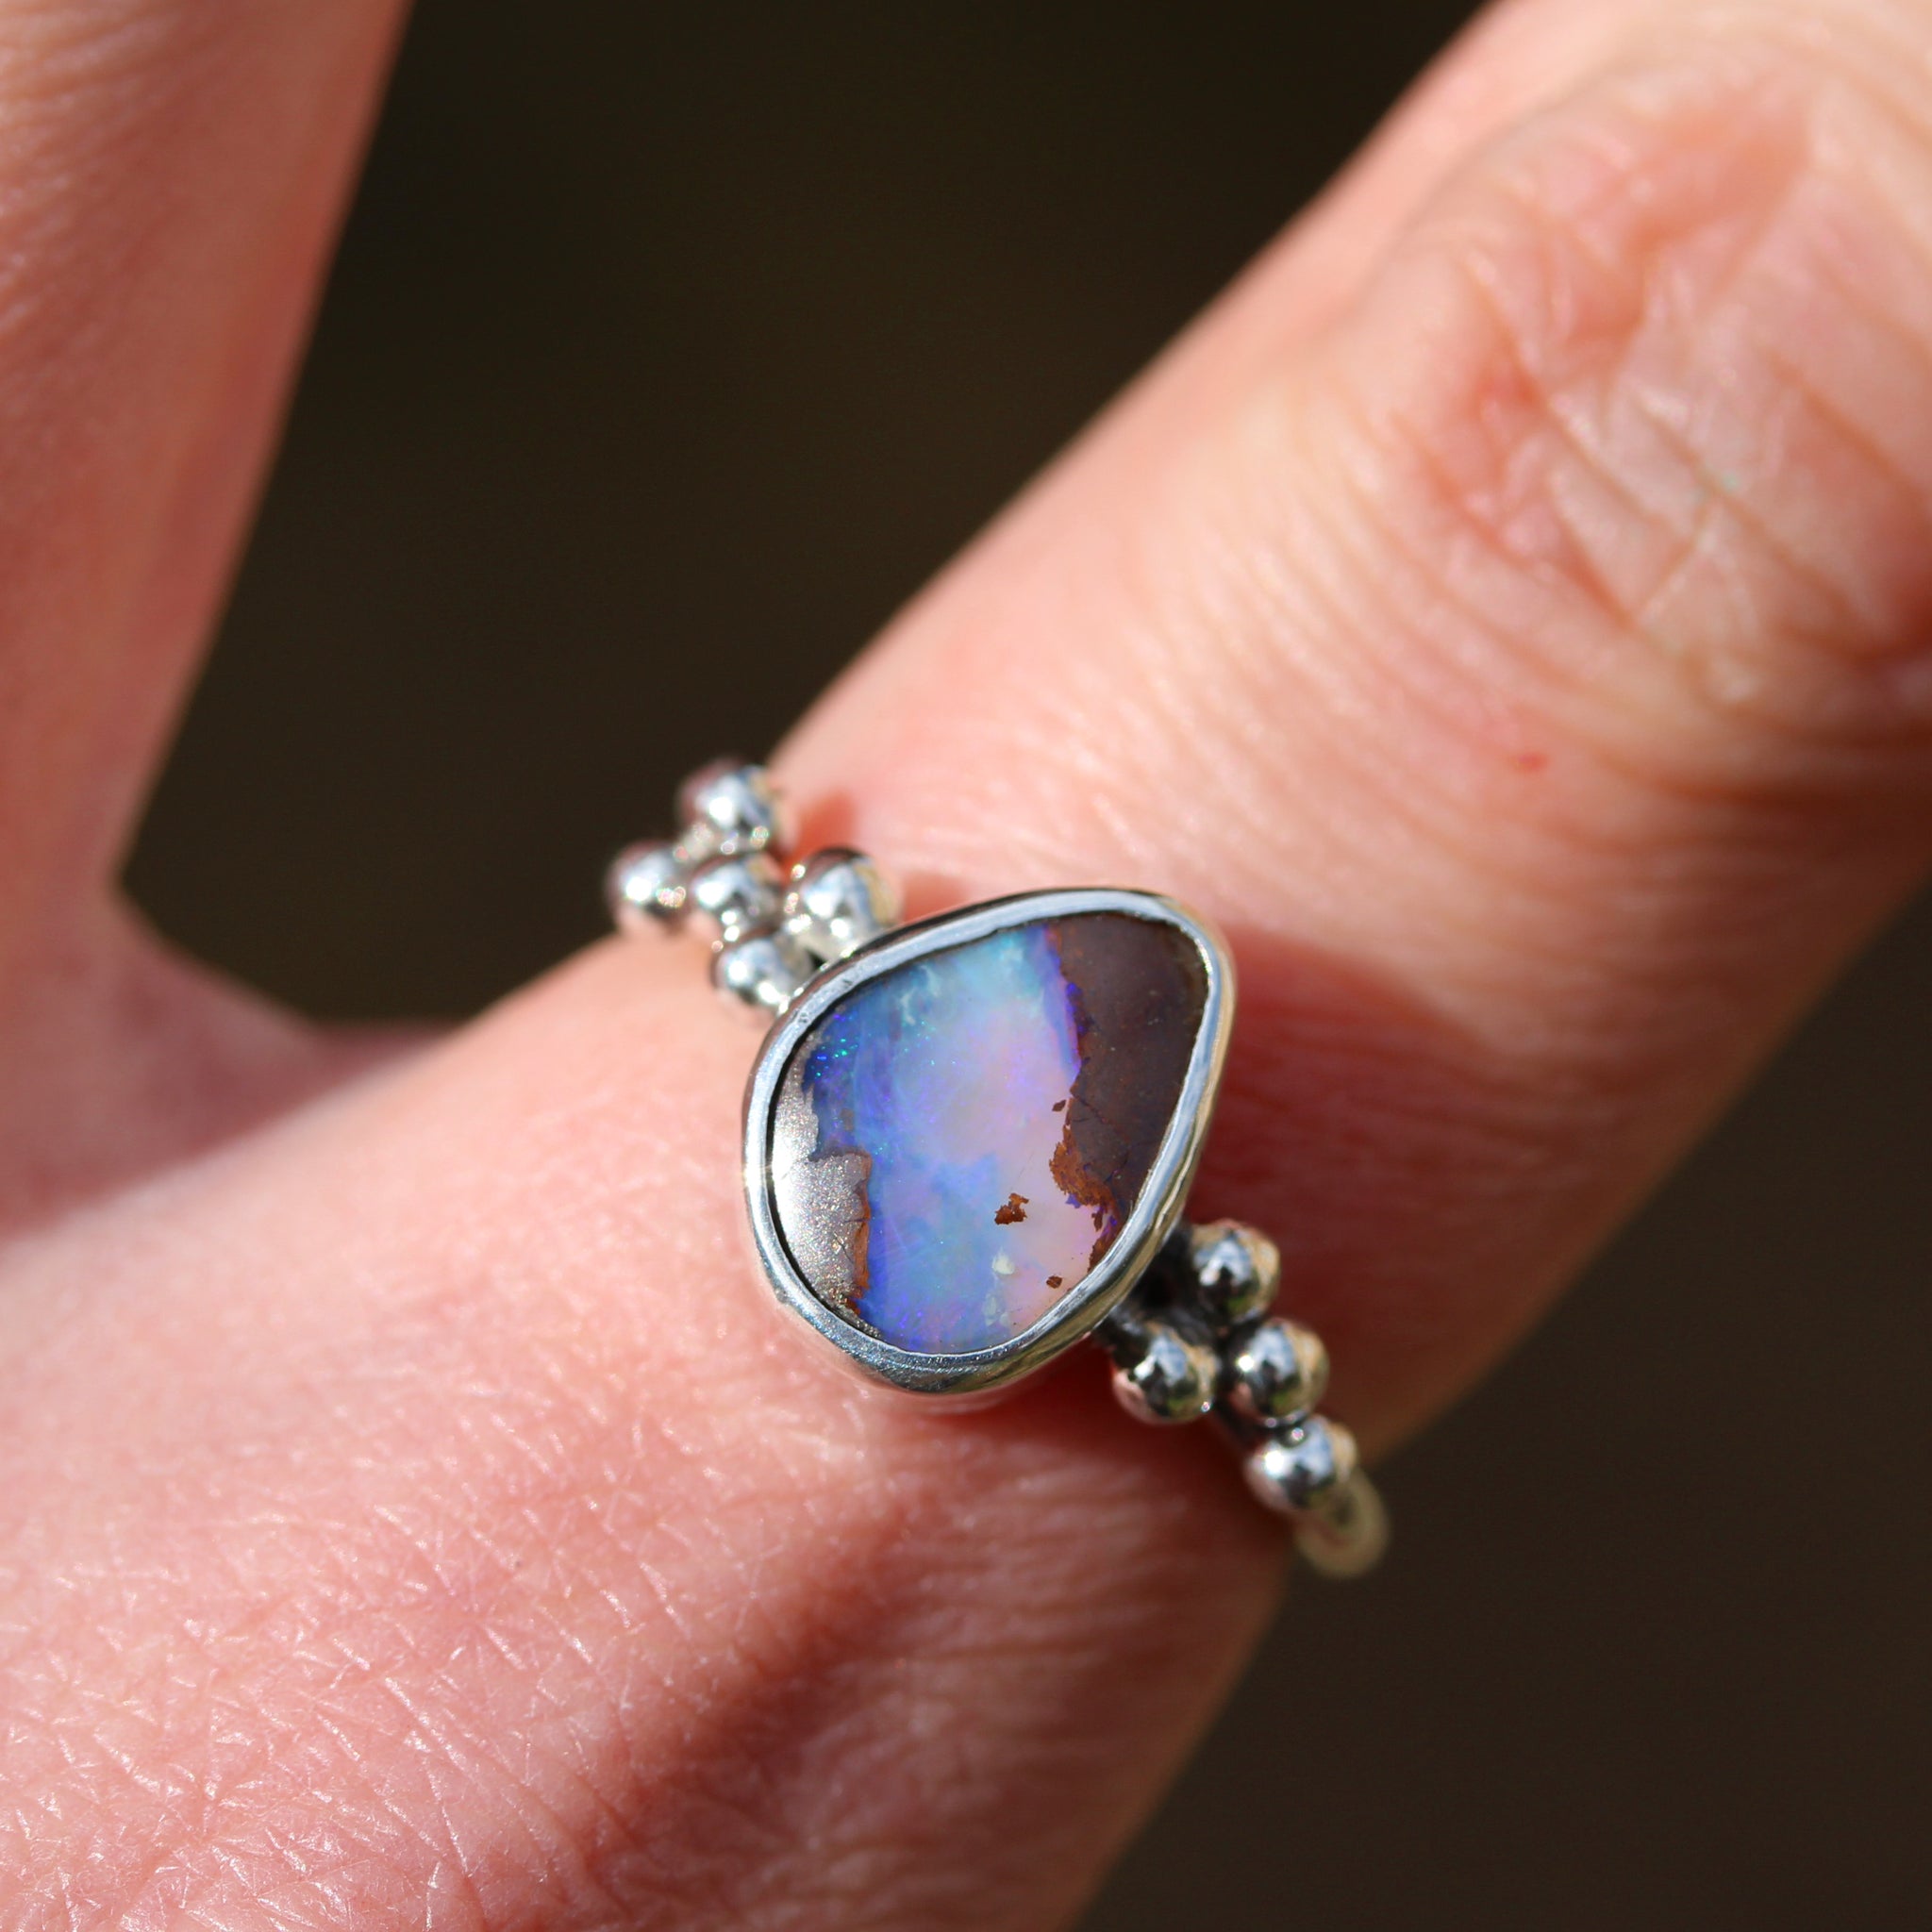 Silver and boulder opal ring handmade in recyled silver with an Australian Boulder Opal 